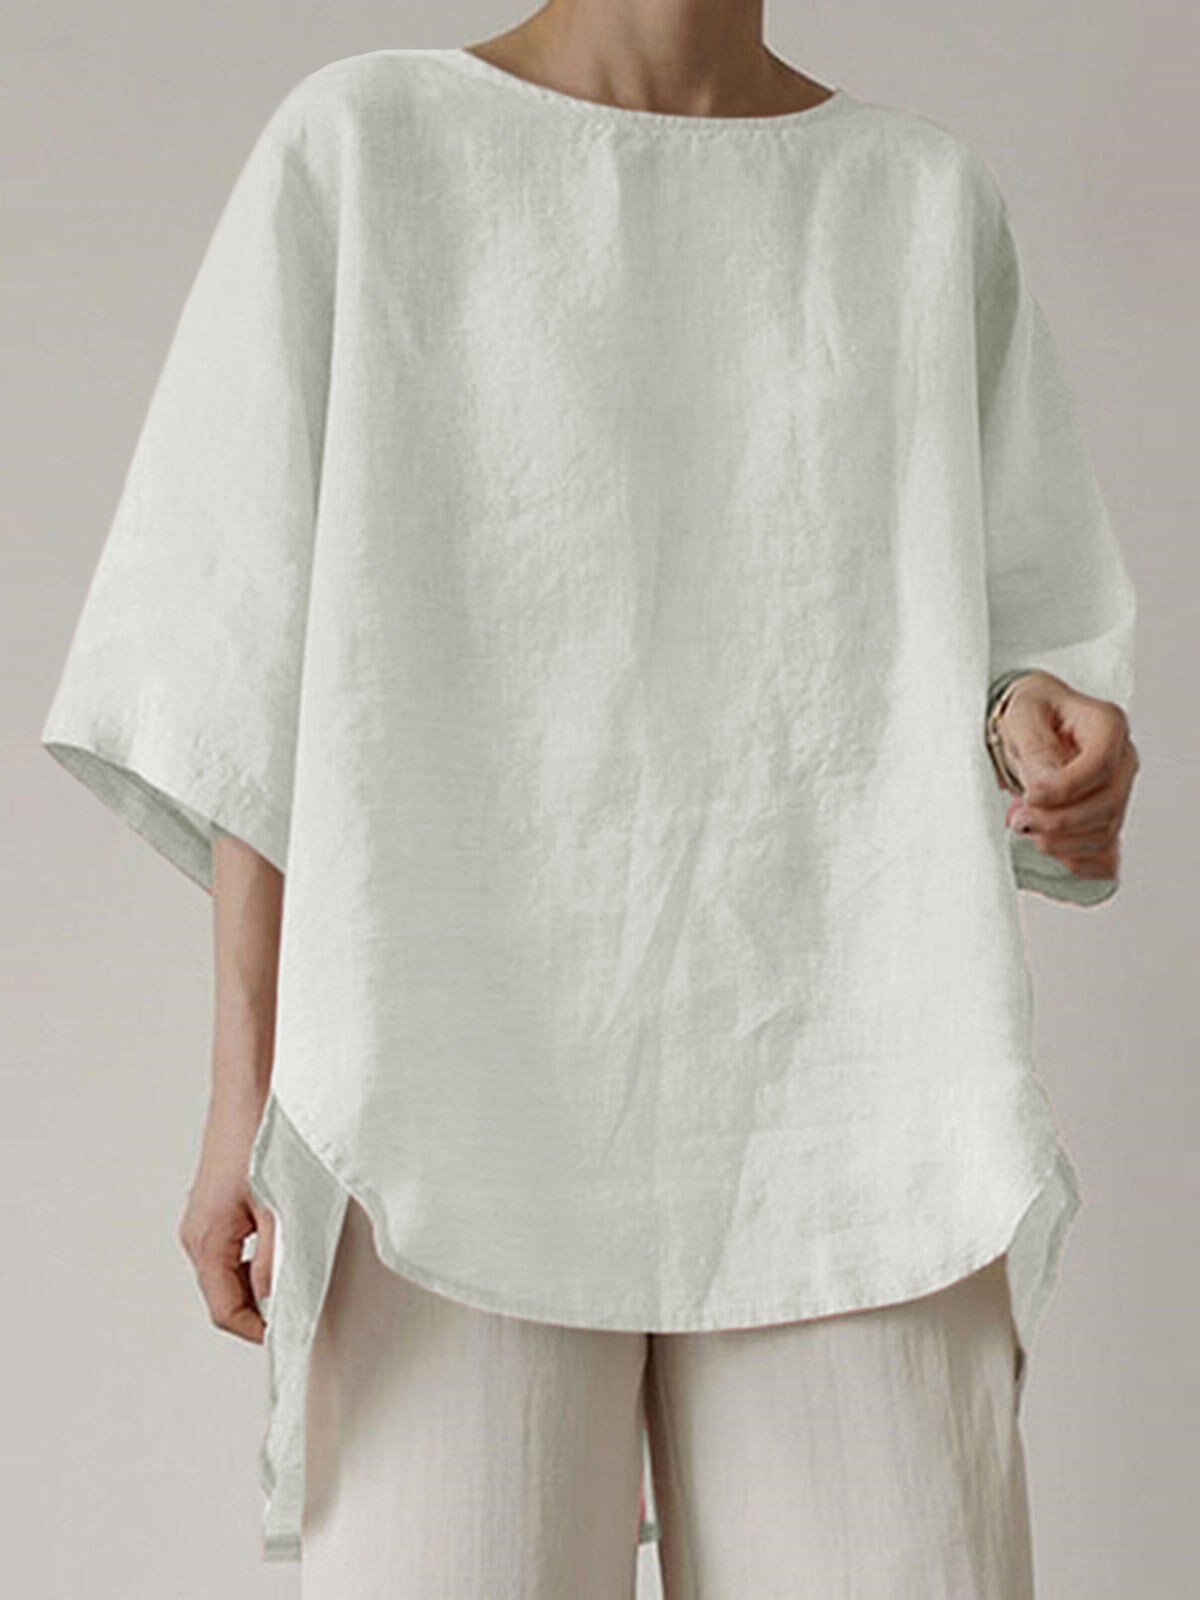 NTG Fad White / S Women's Casual Pure Color Half Sleeve Cotton And Linen Shirt